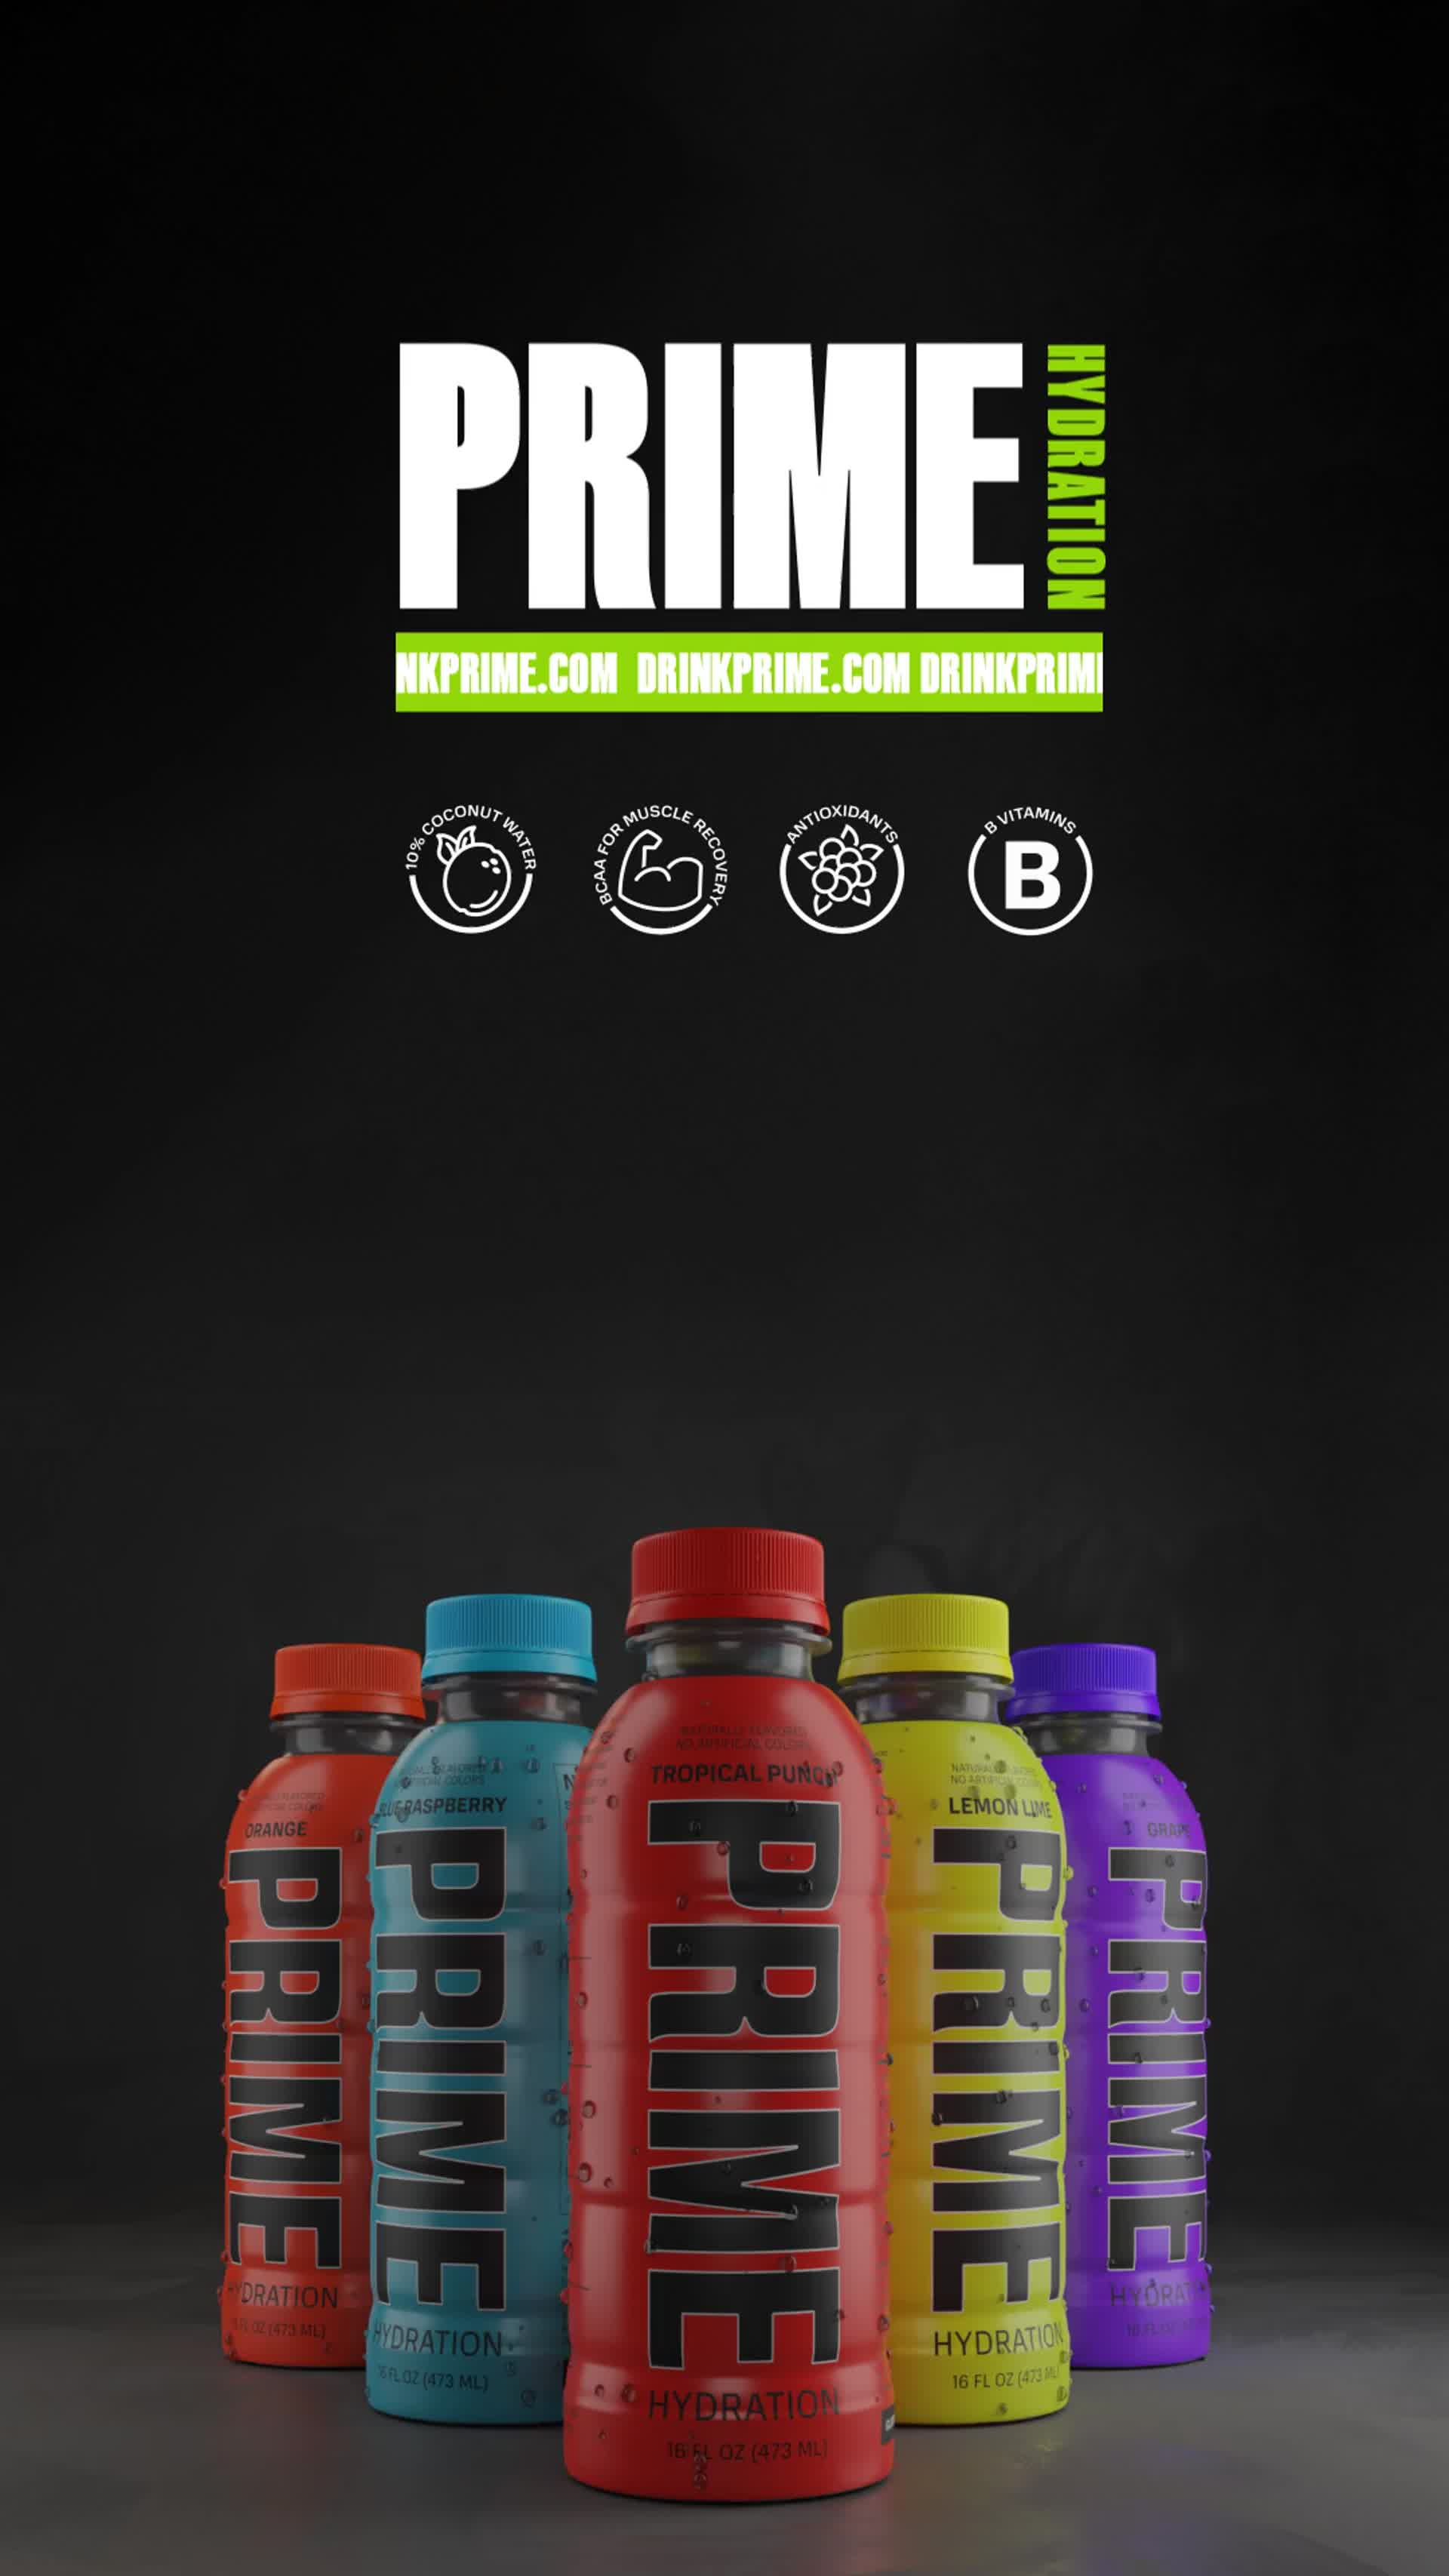 PRIME Hydration by KSI Is Influencer Marketing the future  This Is Local  London